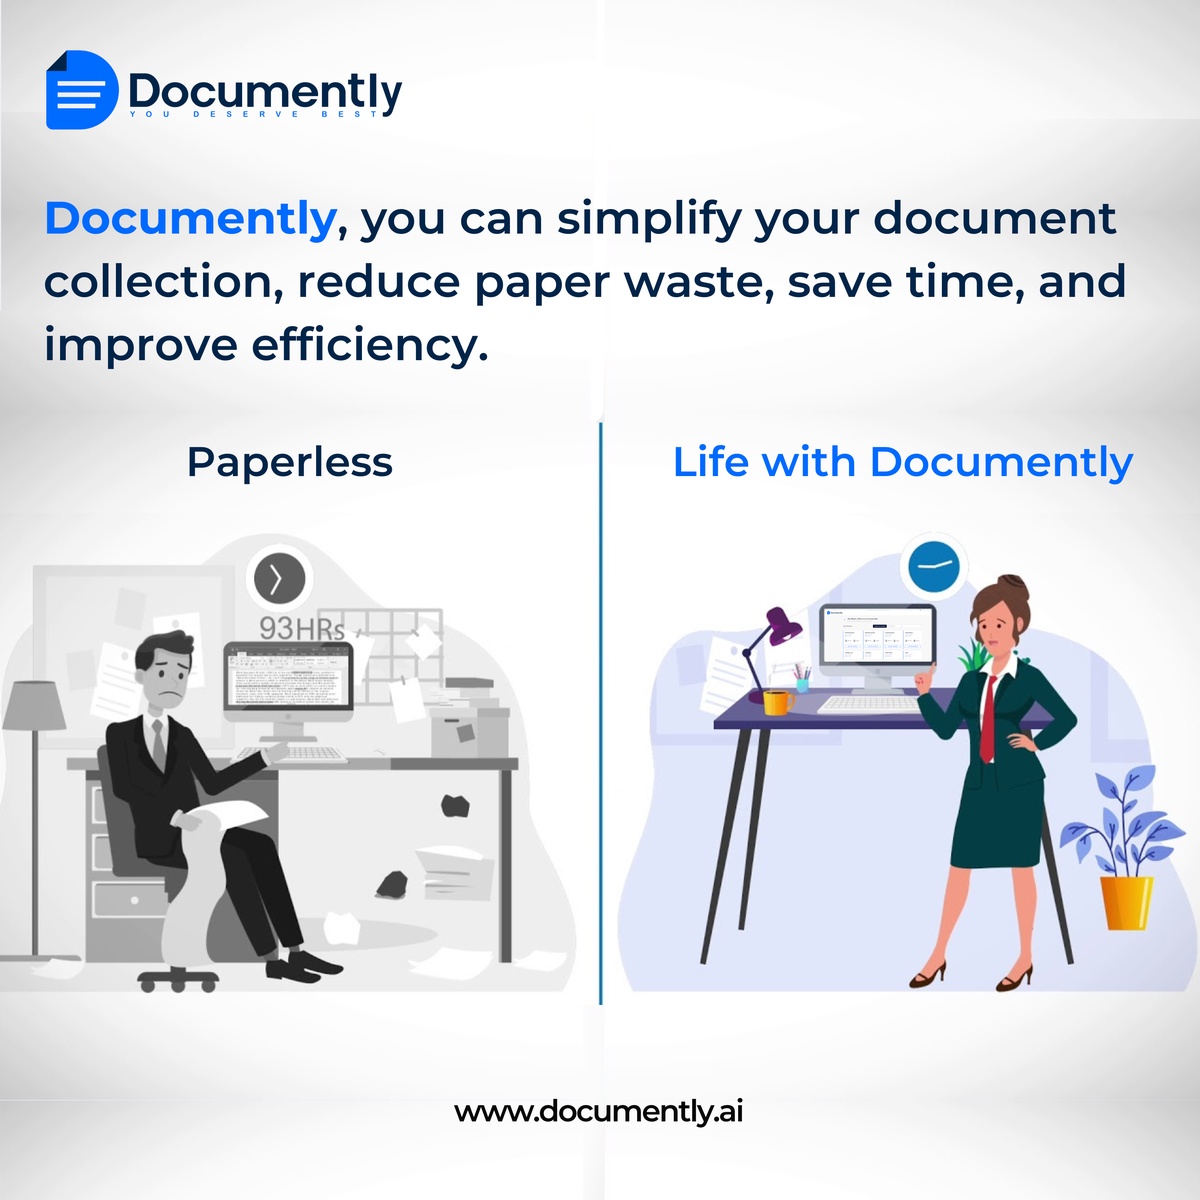 Documently: Connecting Businesses and Individuals Seamlessly